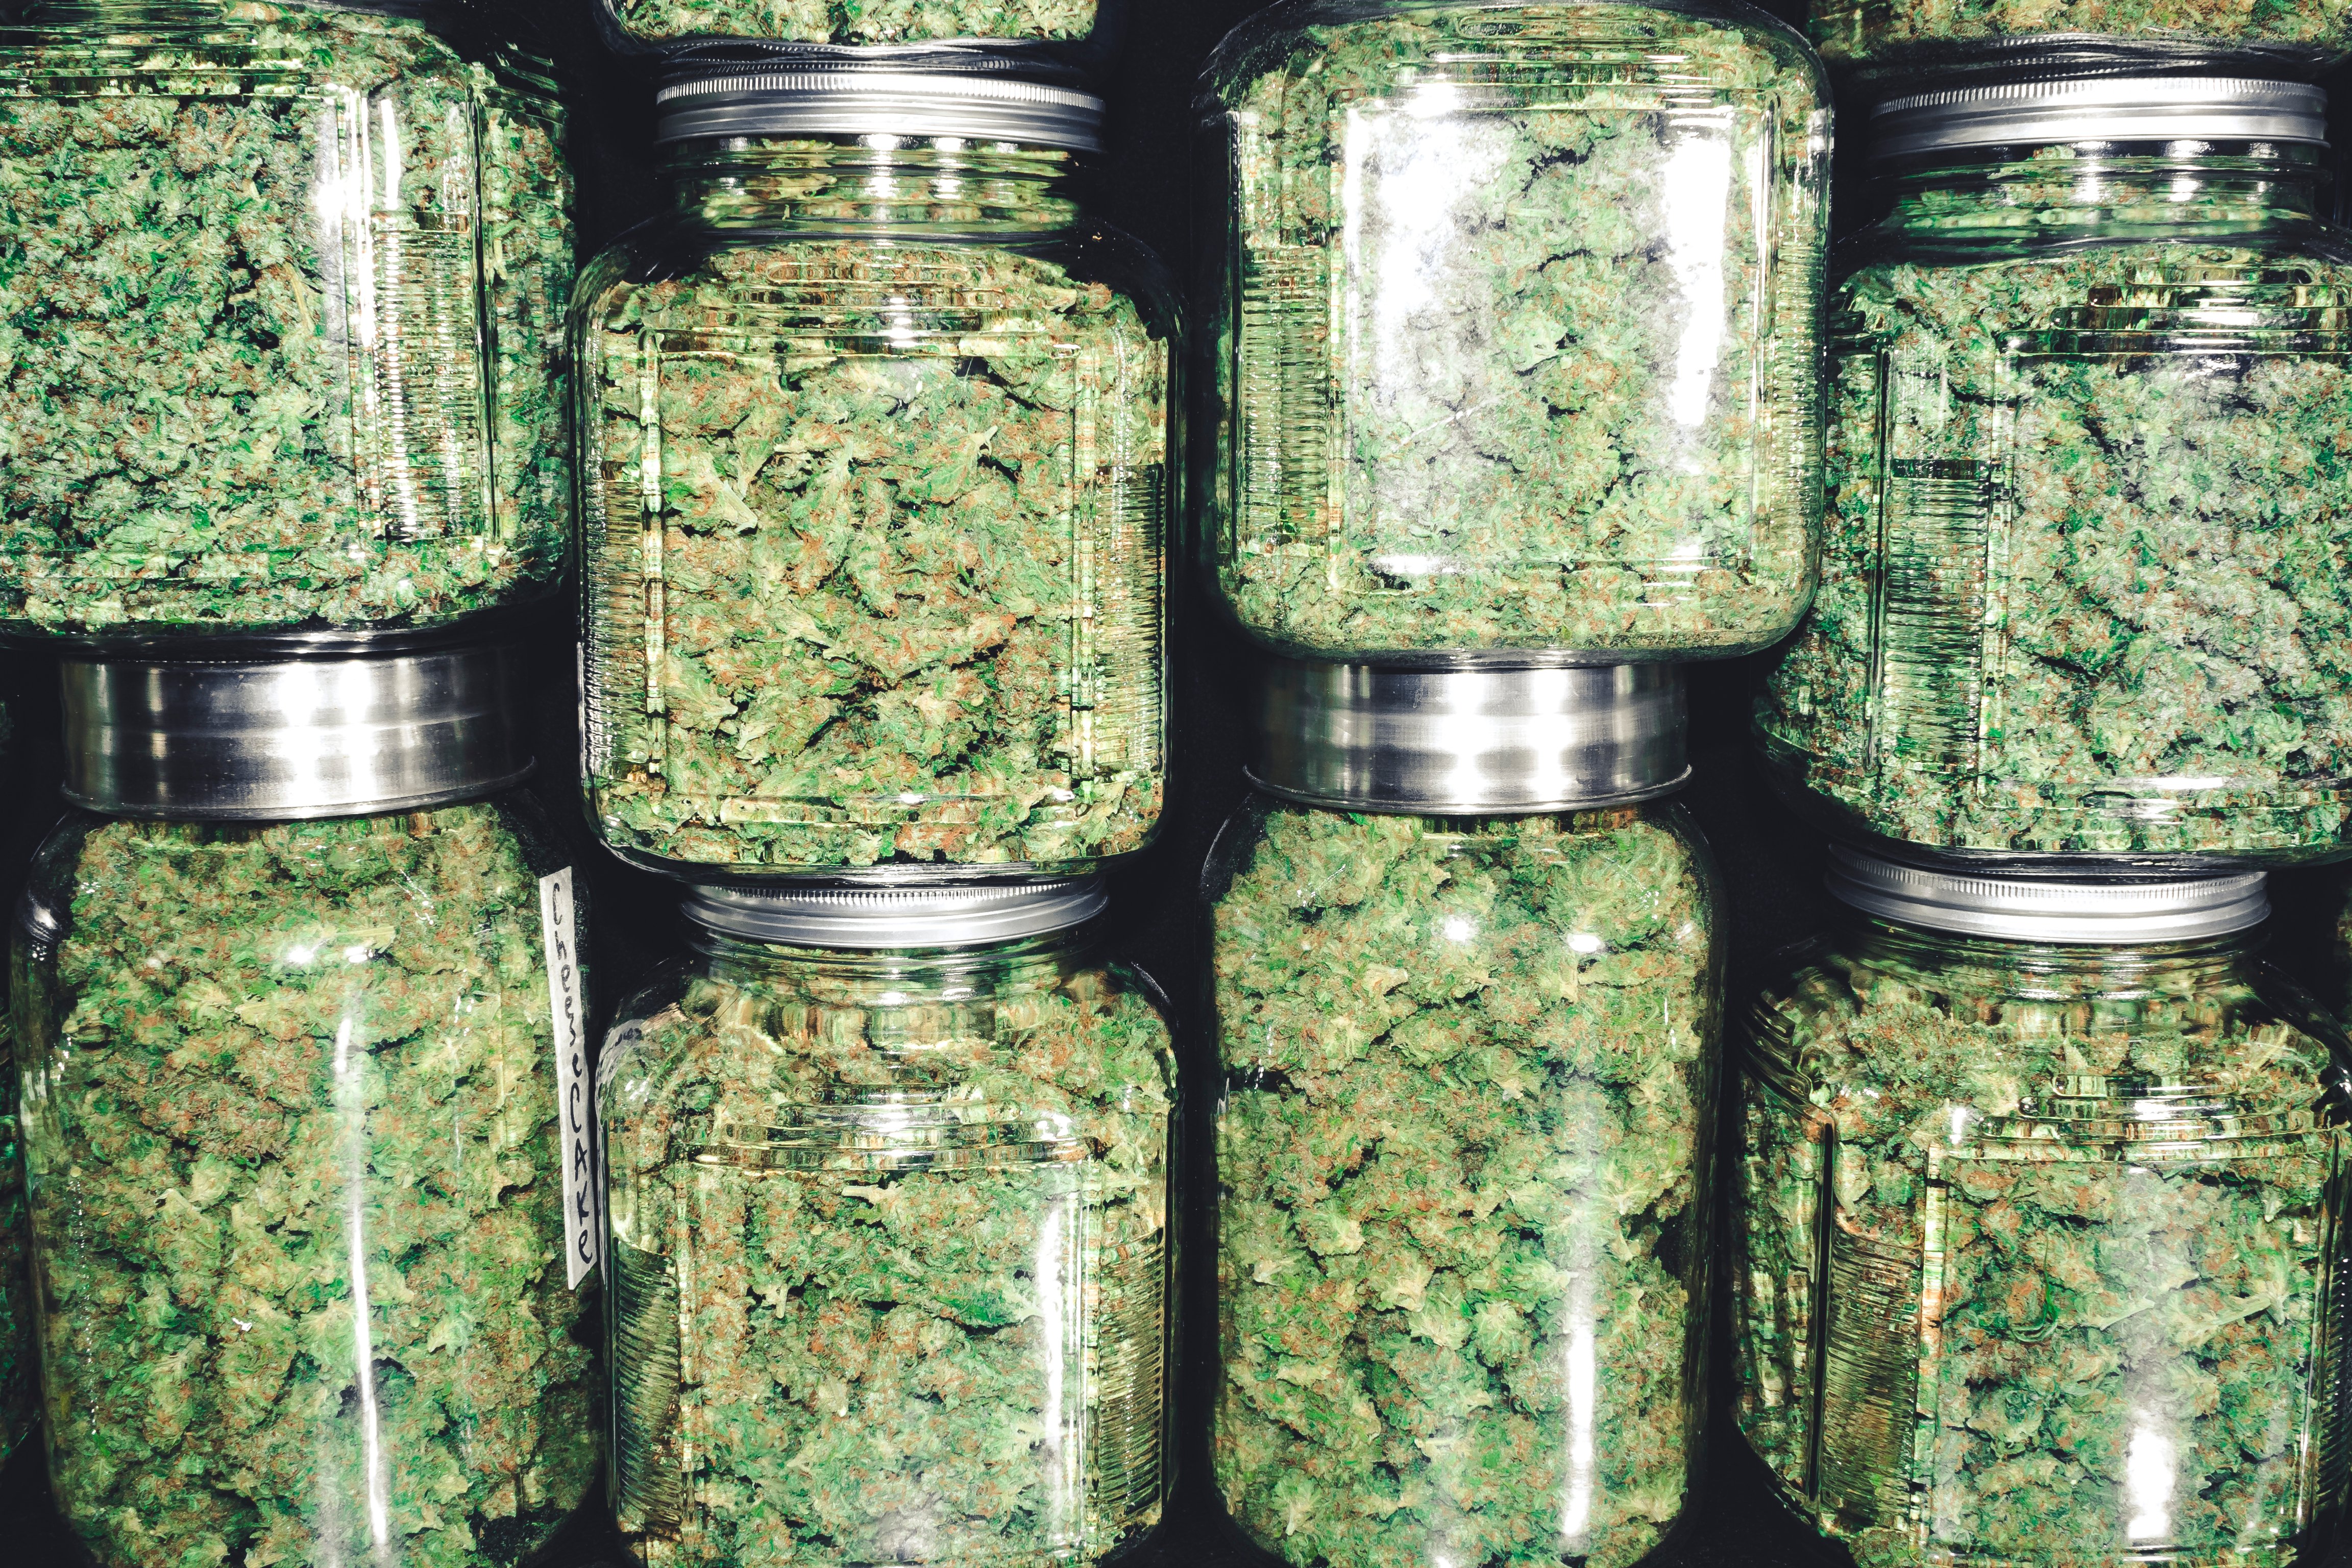 cannabis in curing jars